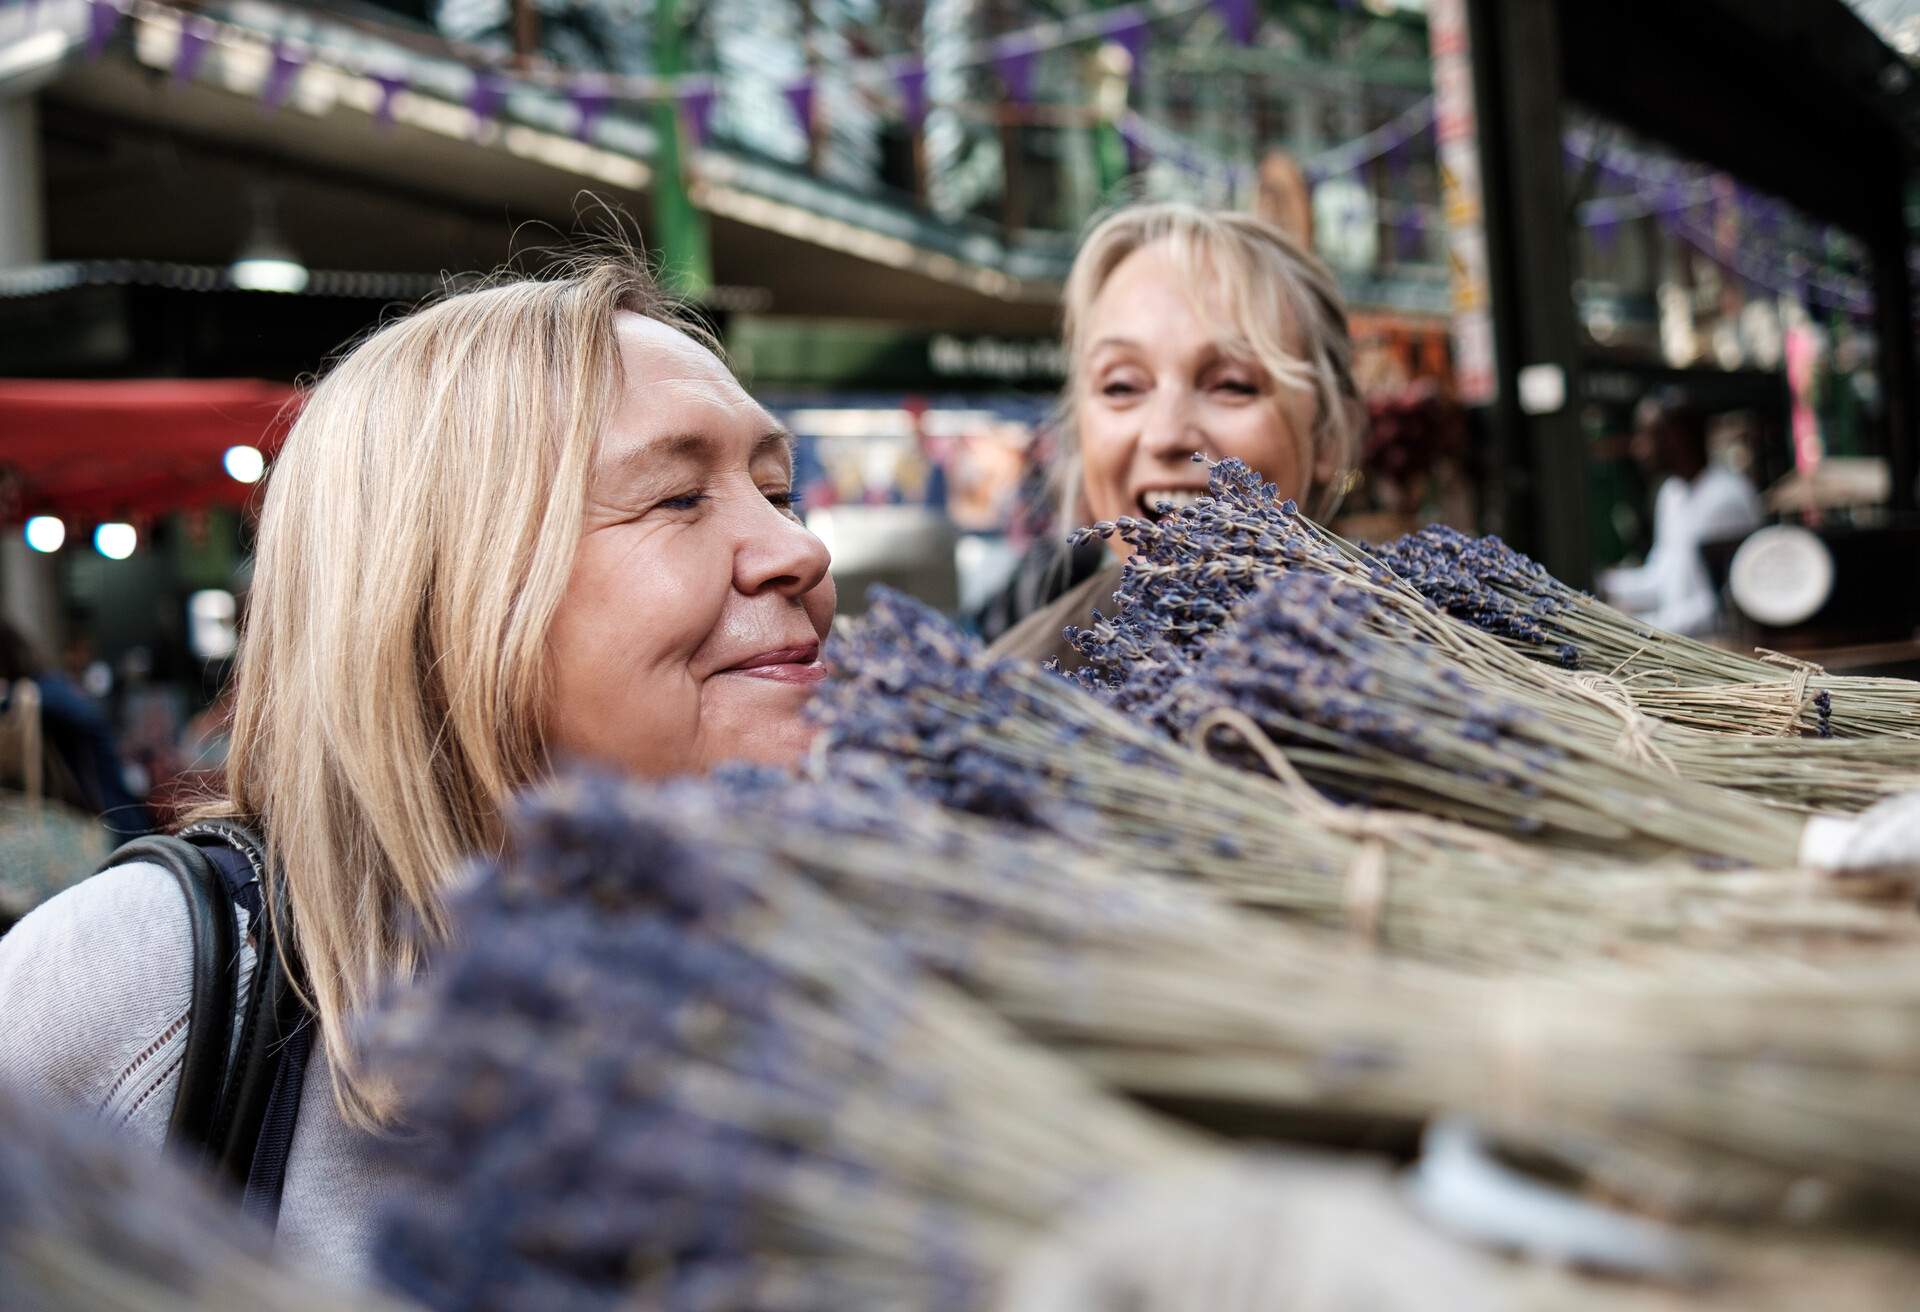 An older adult smells the pile of lavender while her companion watches her with a smile.